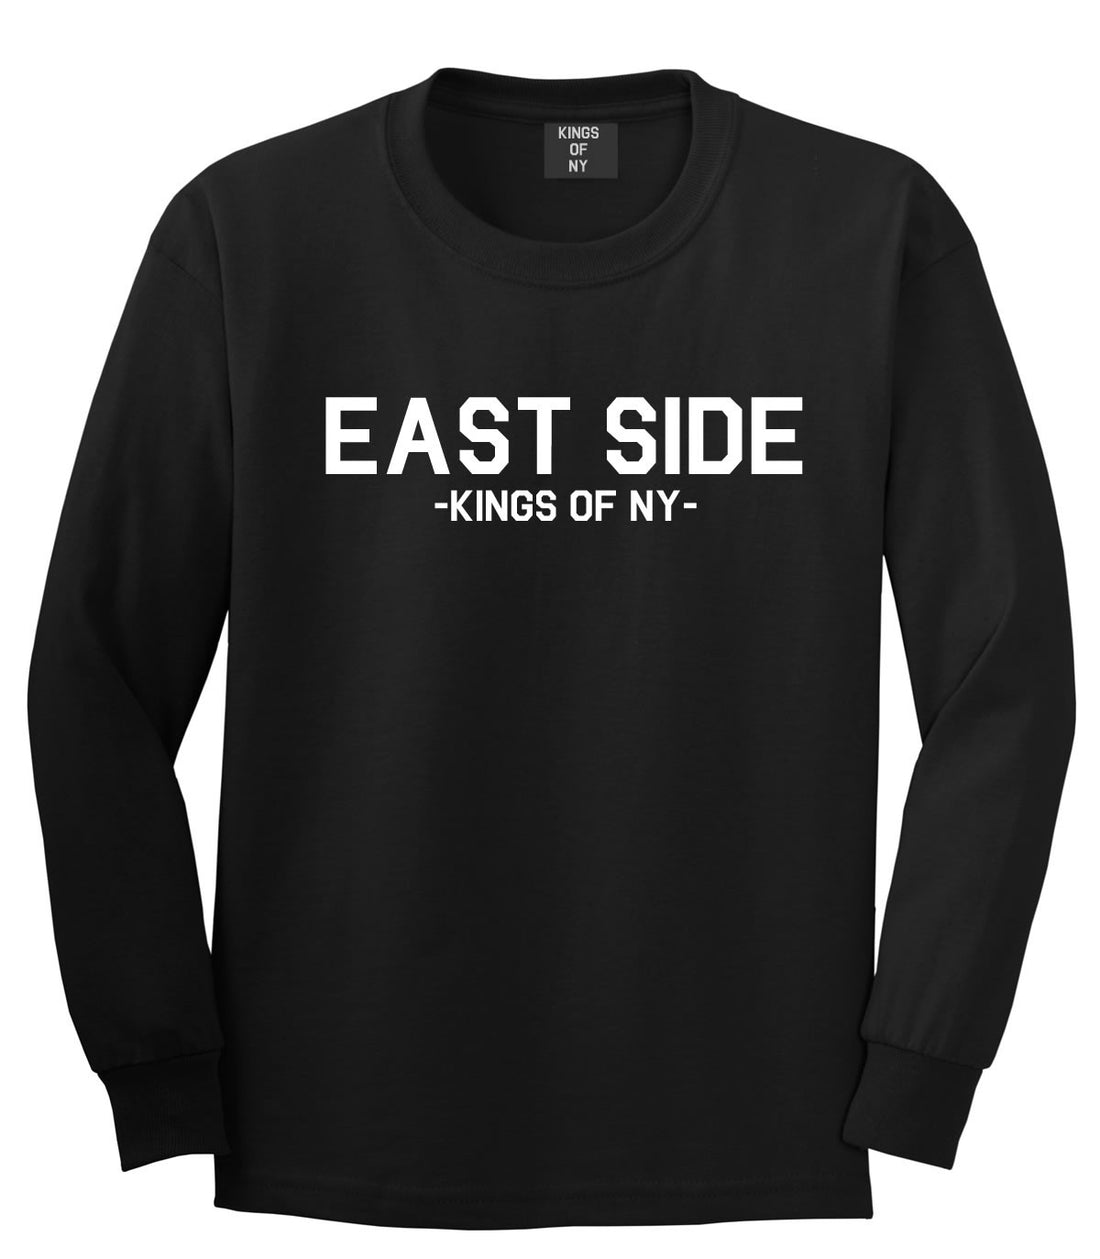 East Side NYC New York Long Sleeve T-Shirt in Black